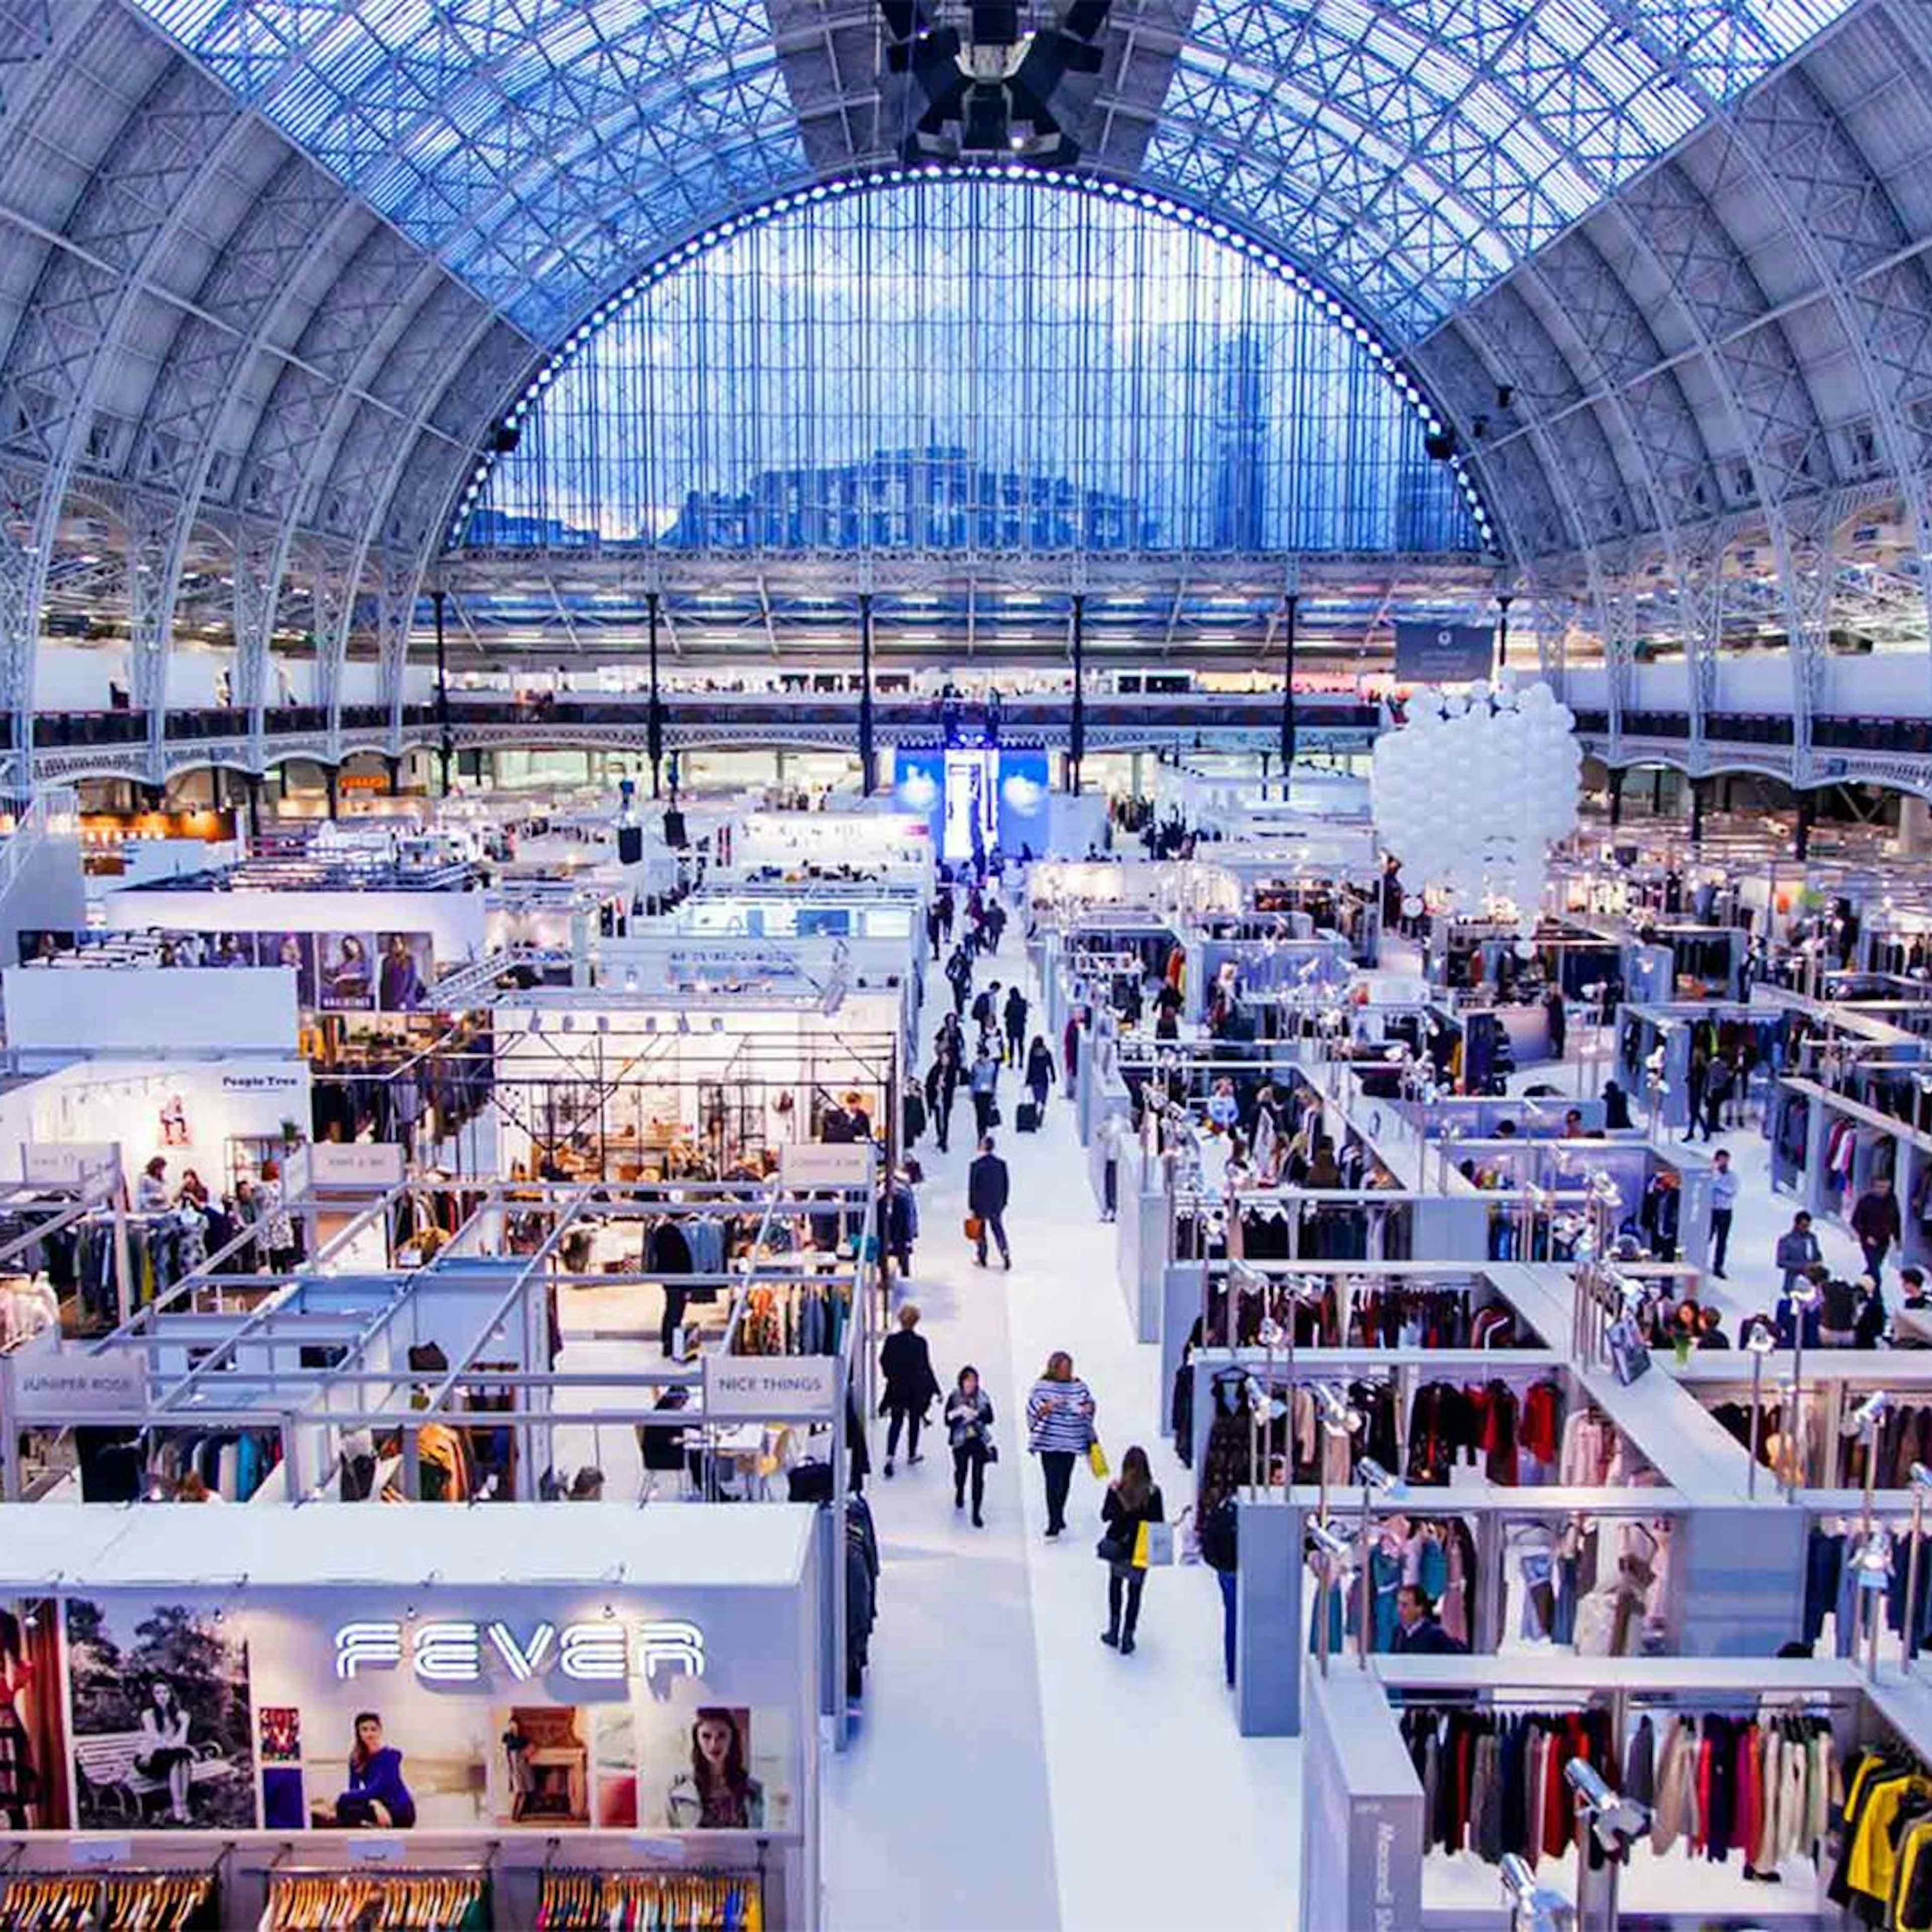 A - Z of the UK's best exhibition venues